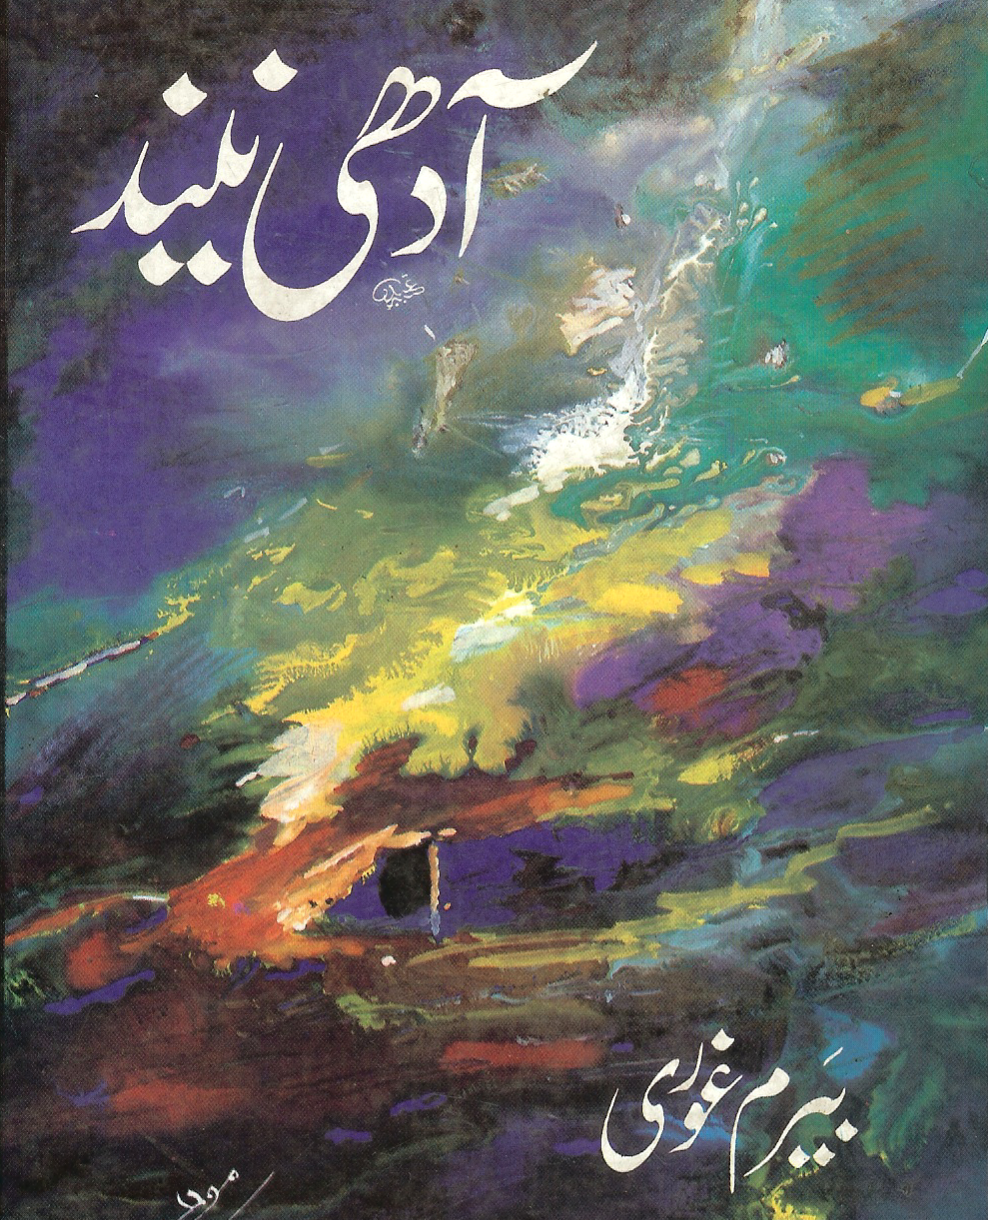 Baram Ghouri's picture of the book